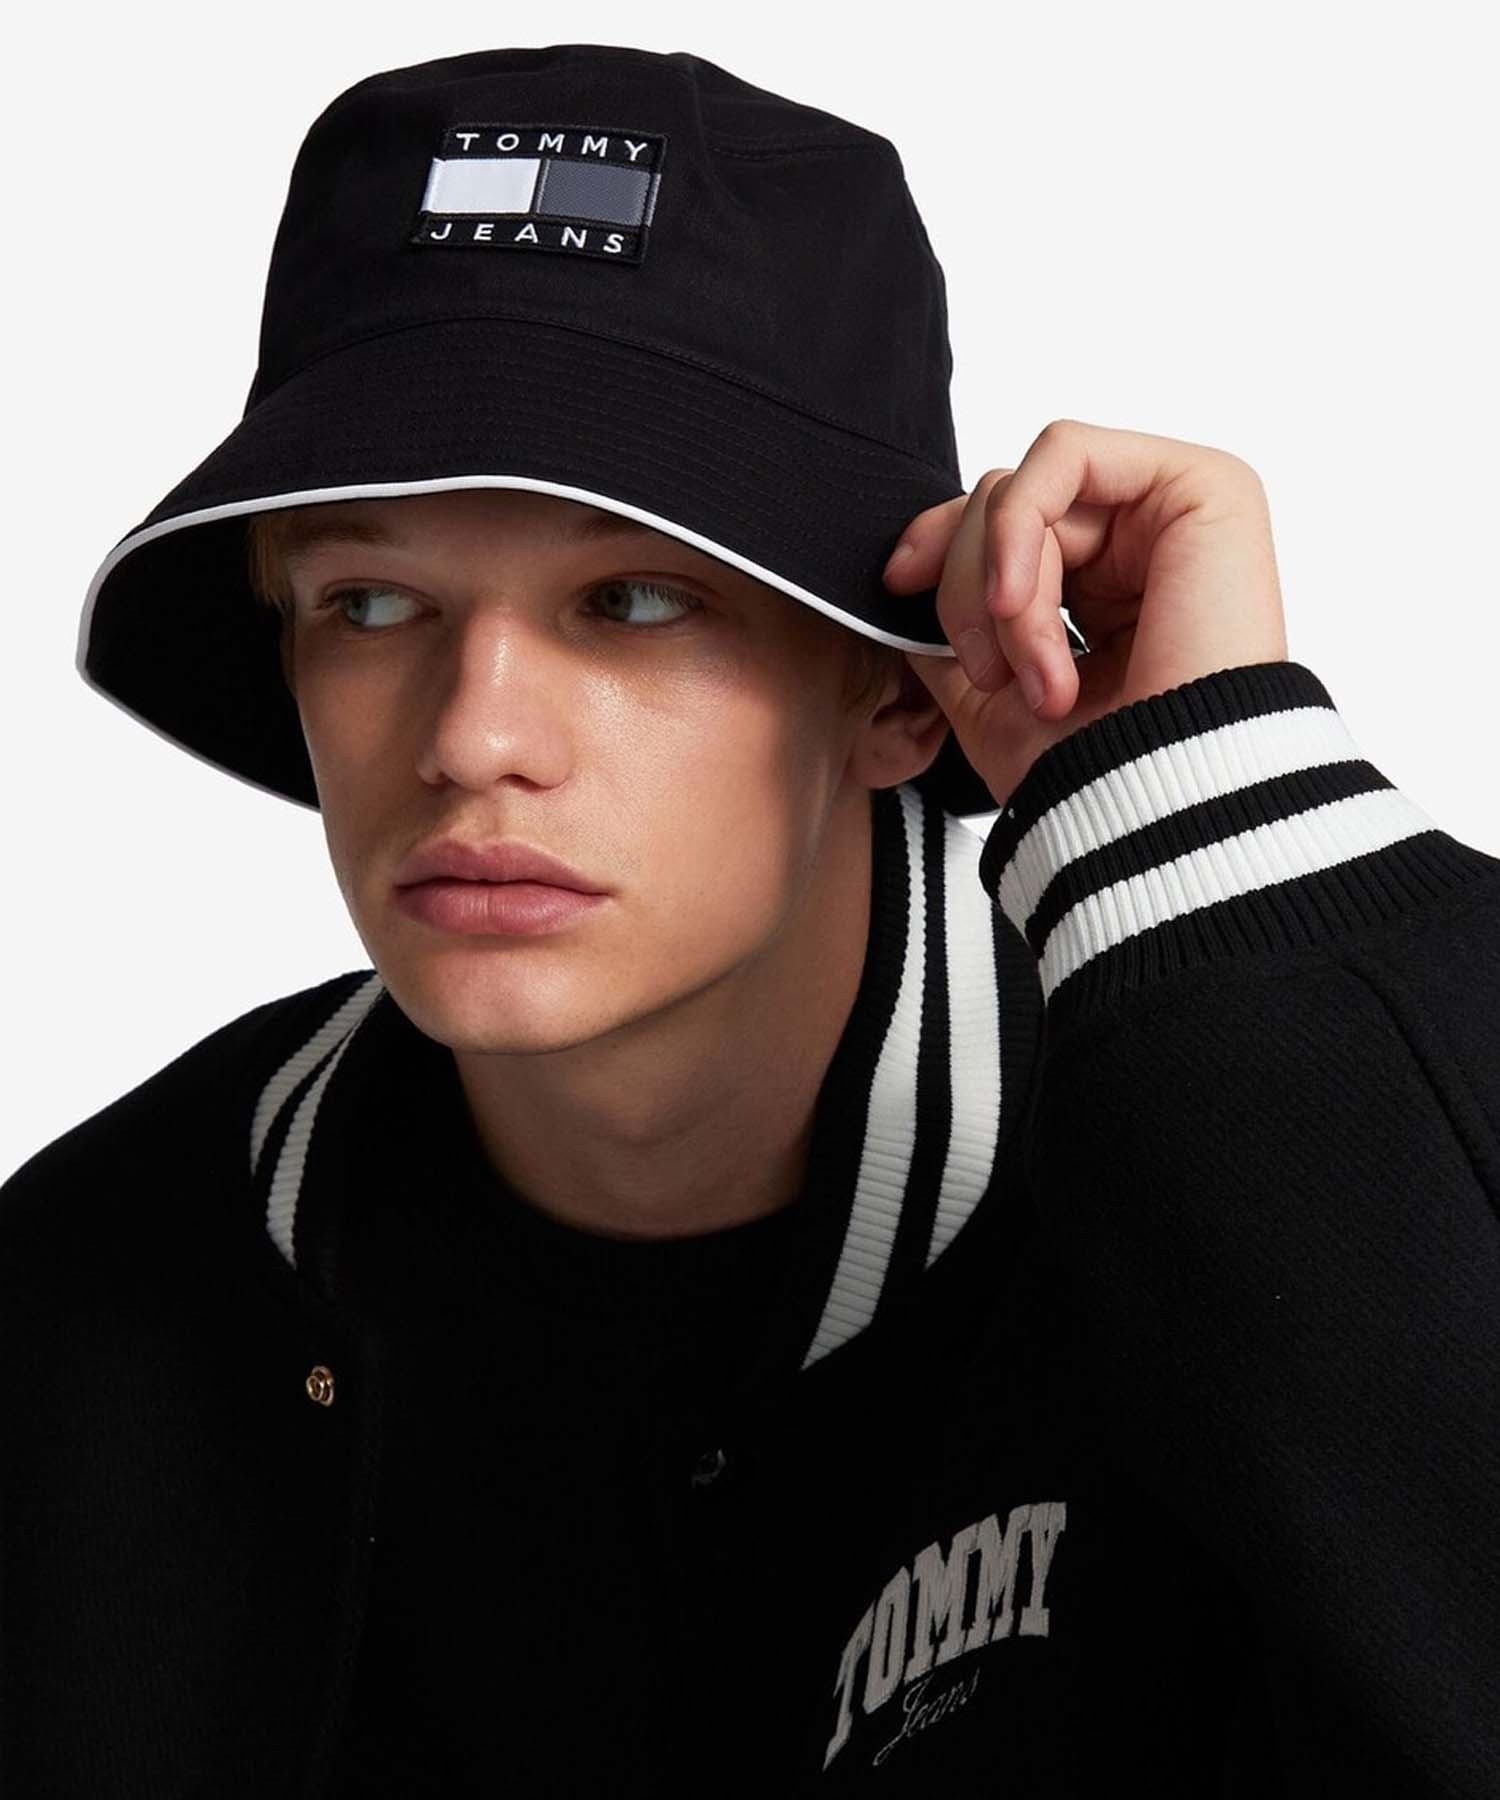 TOMMY JEANS/トミージーンズ ハット HERITAGE BUCKET HAT ヘリテージ